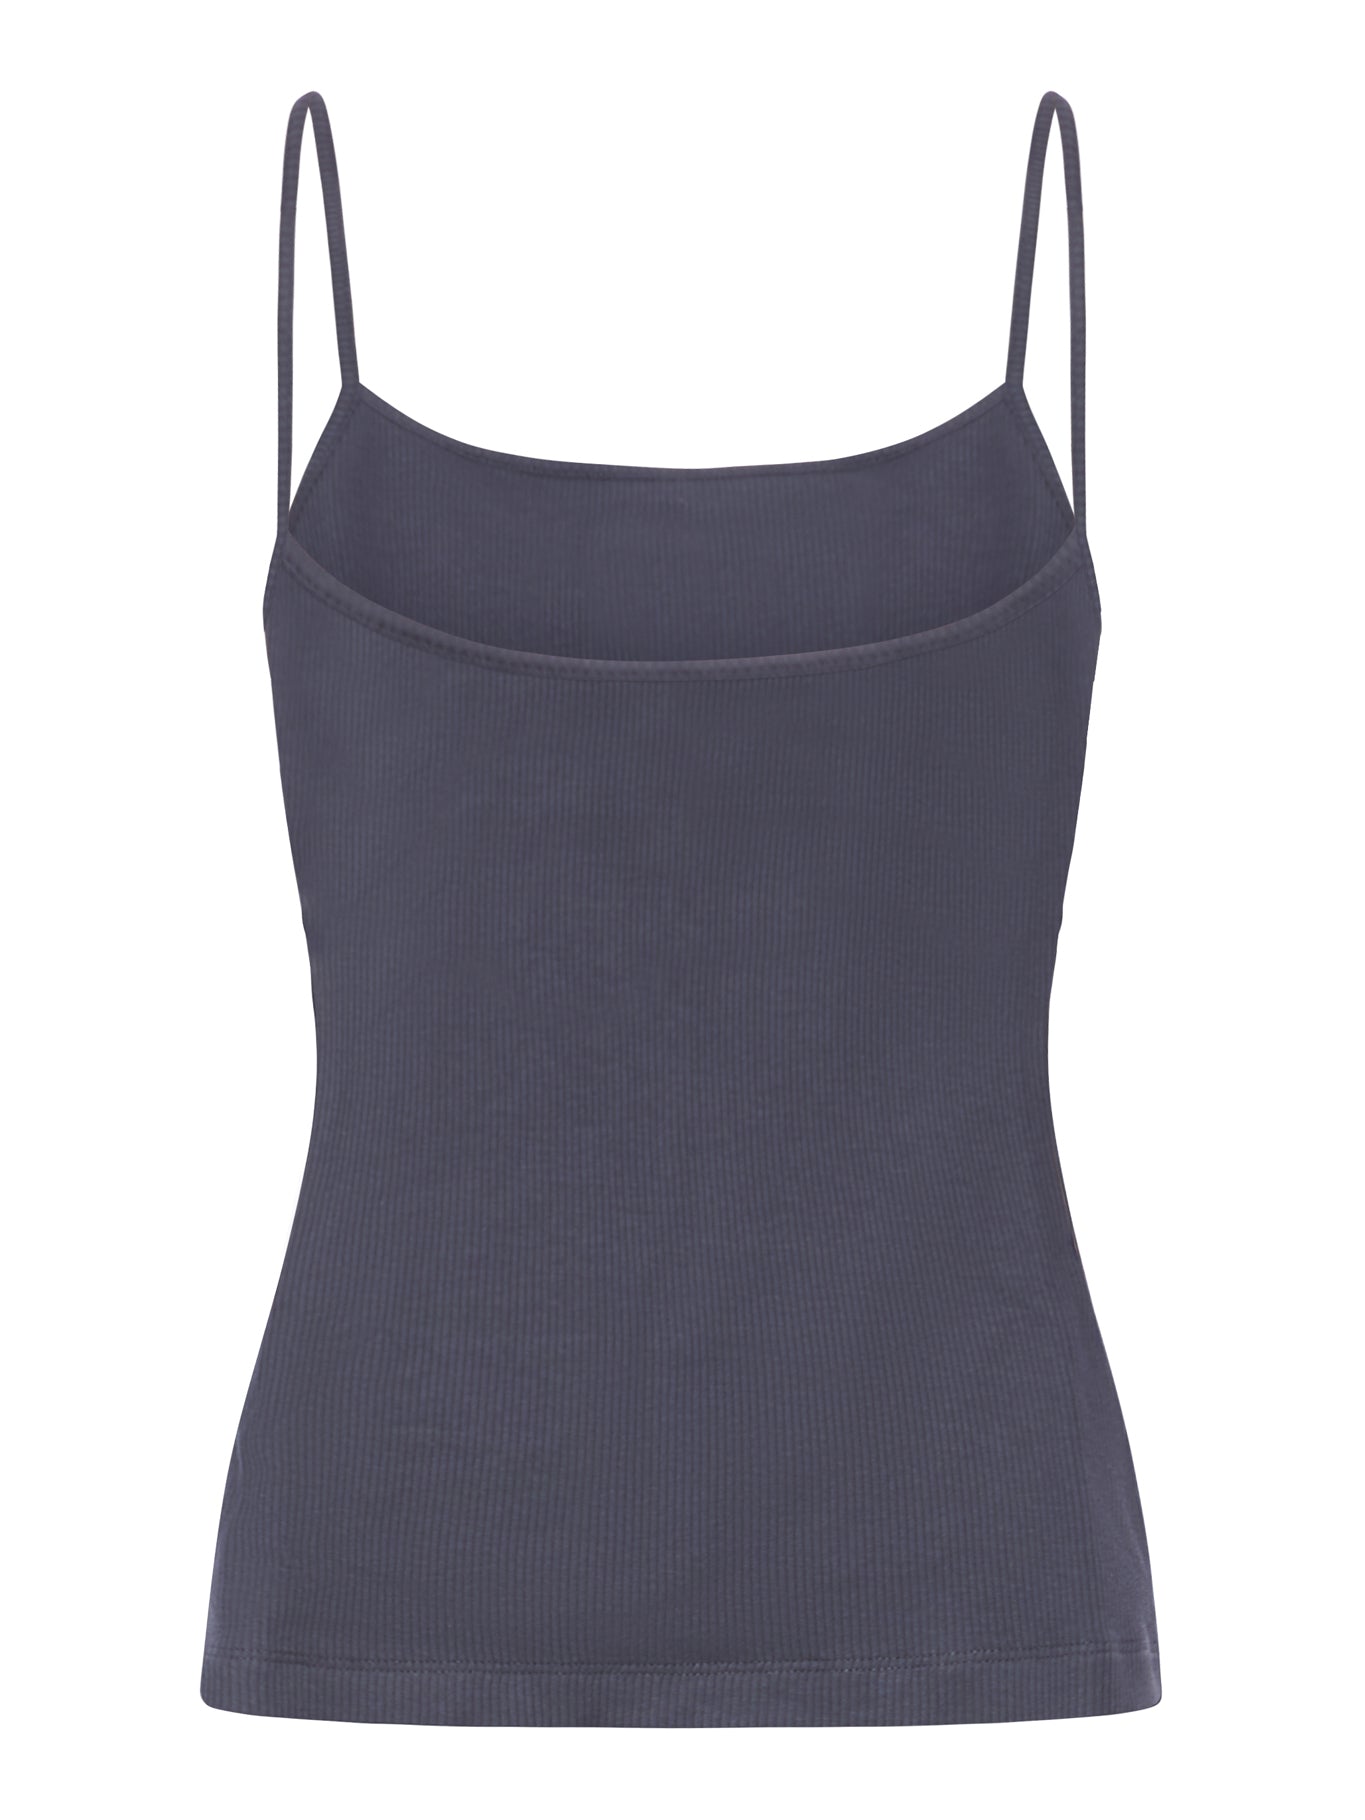 Anagram strappy top in cotton